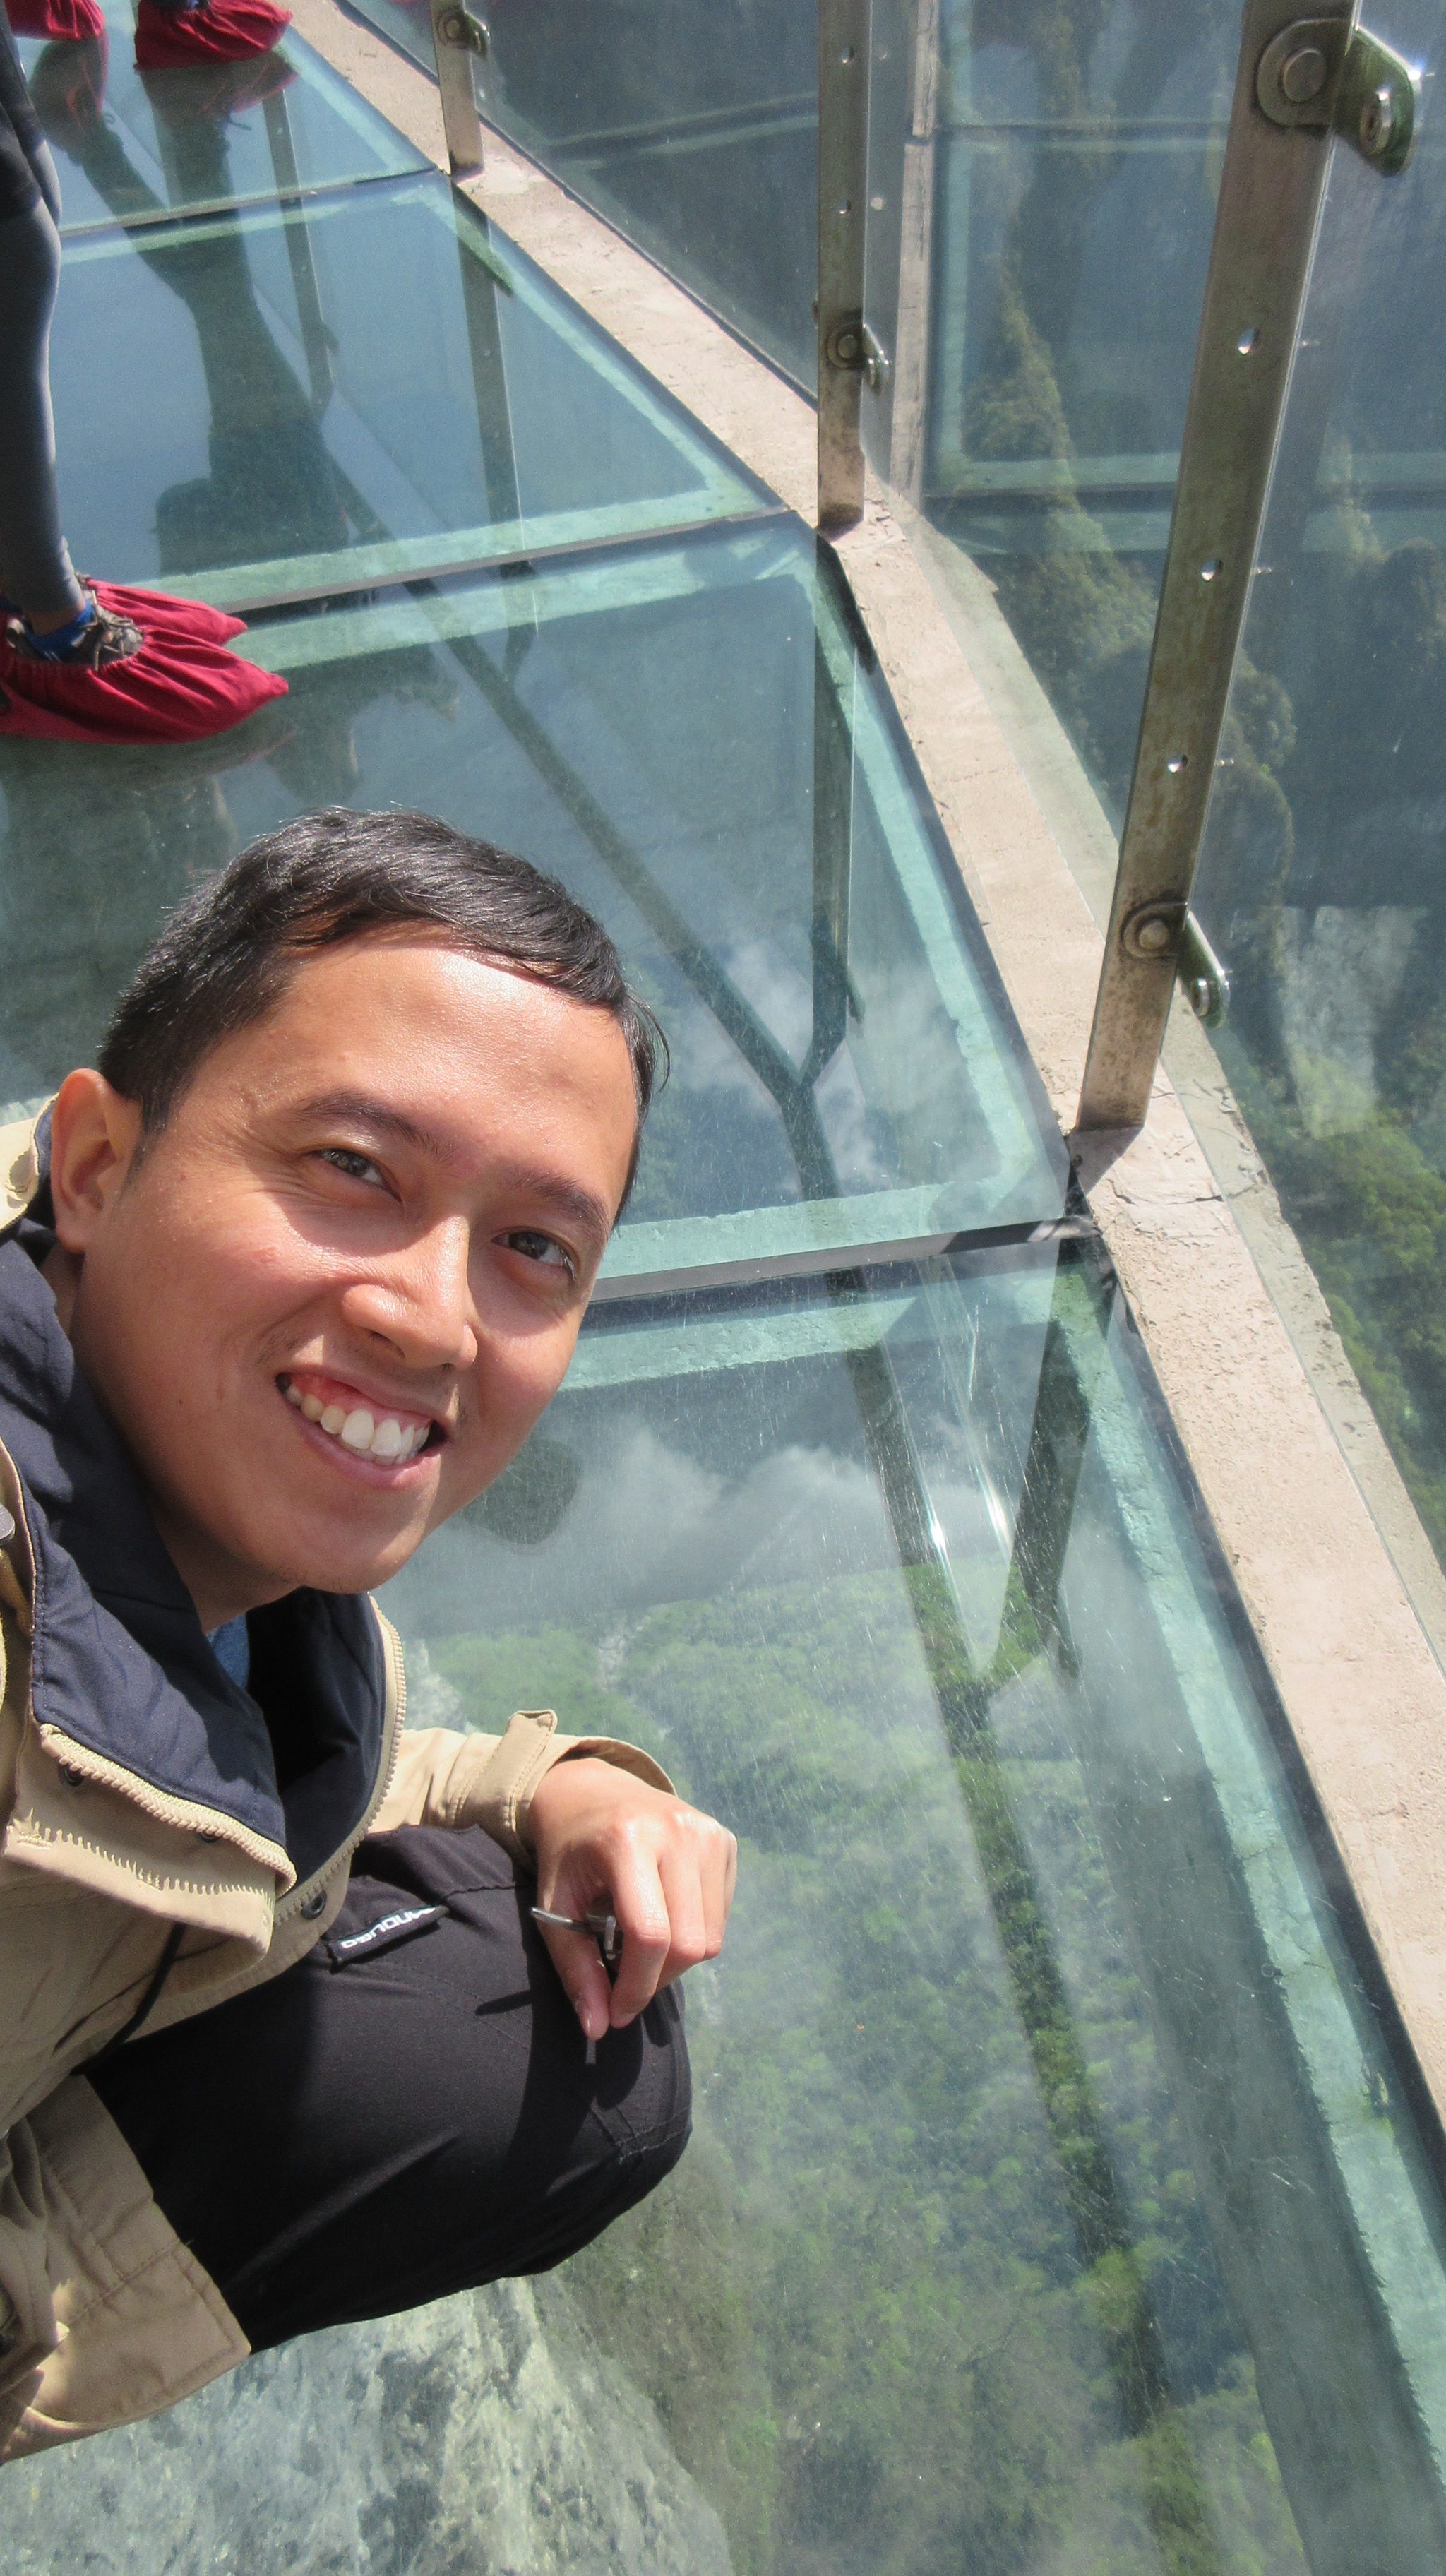 GLASS WALKWAY. For a small fee, you get to walk on a glass walkway and feel that you are walking on clouds.  